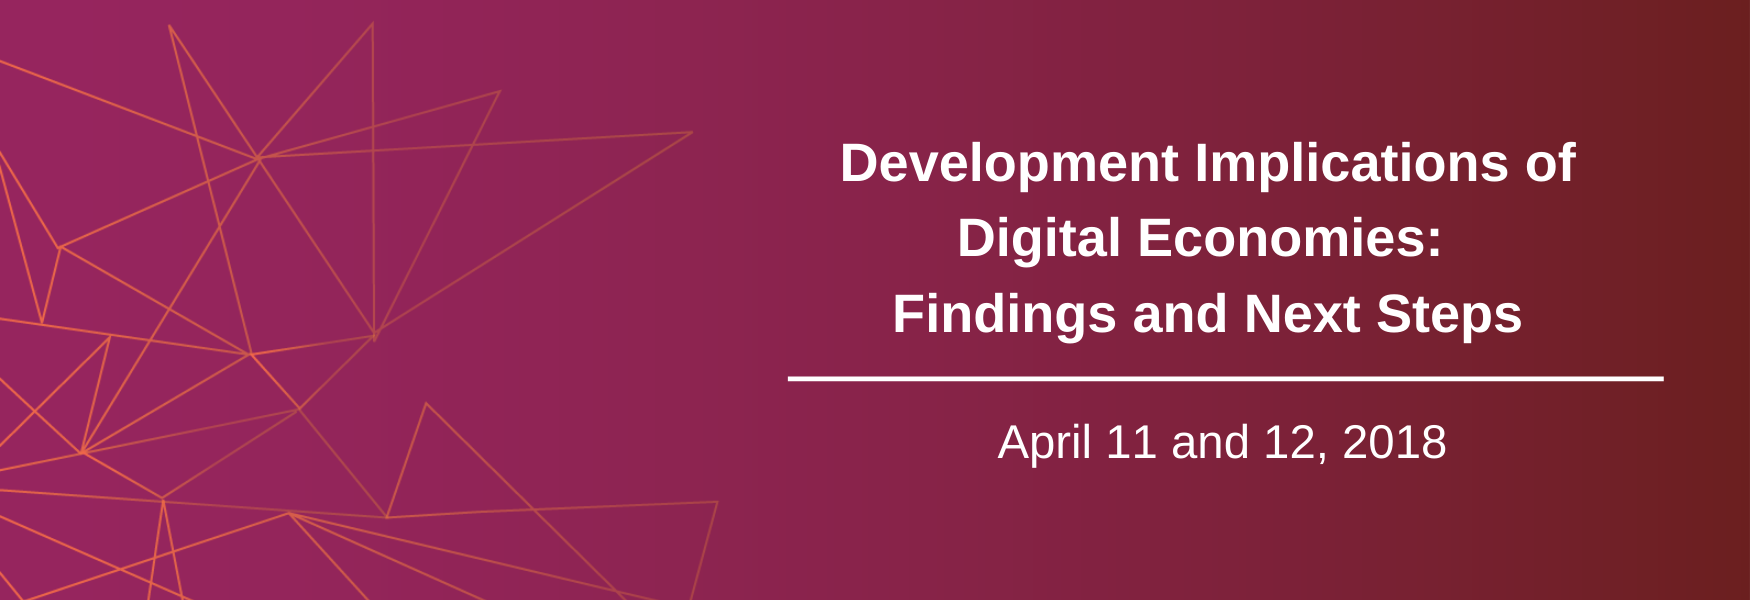 Development Implications of Digital Economies: Findings and Next Steps